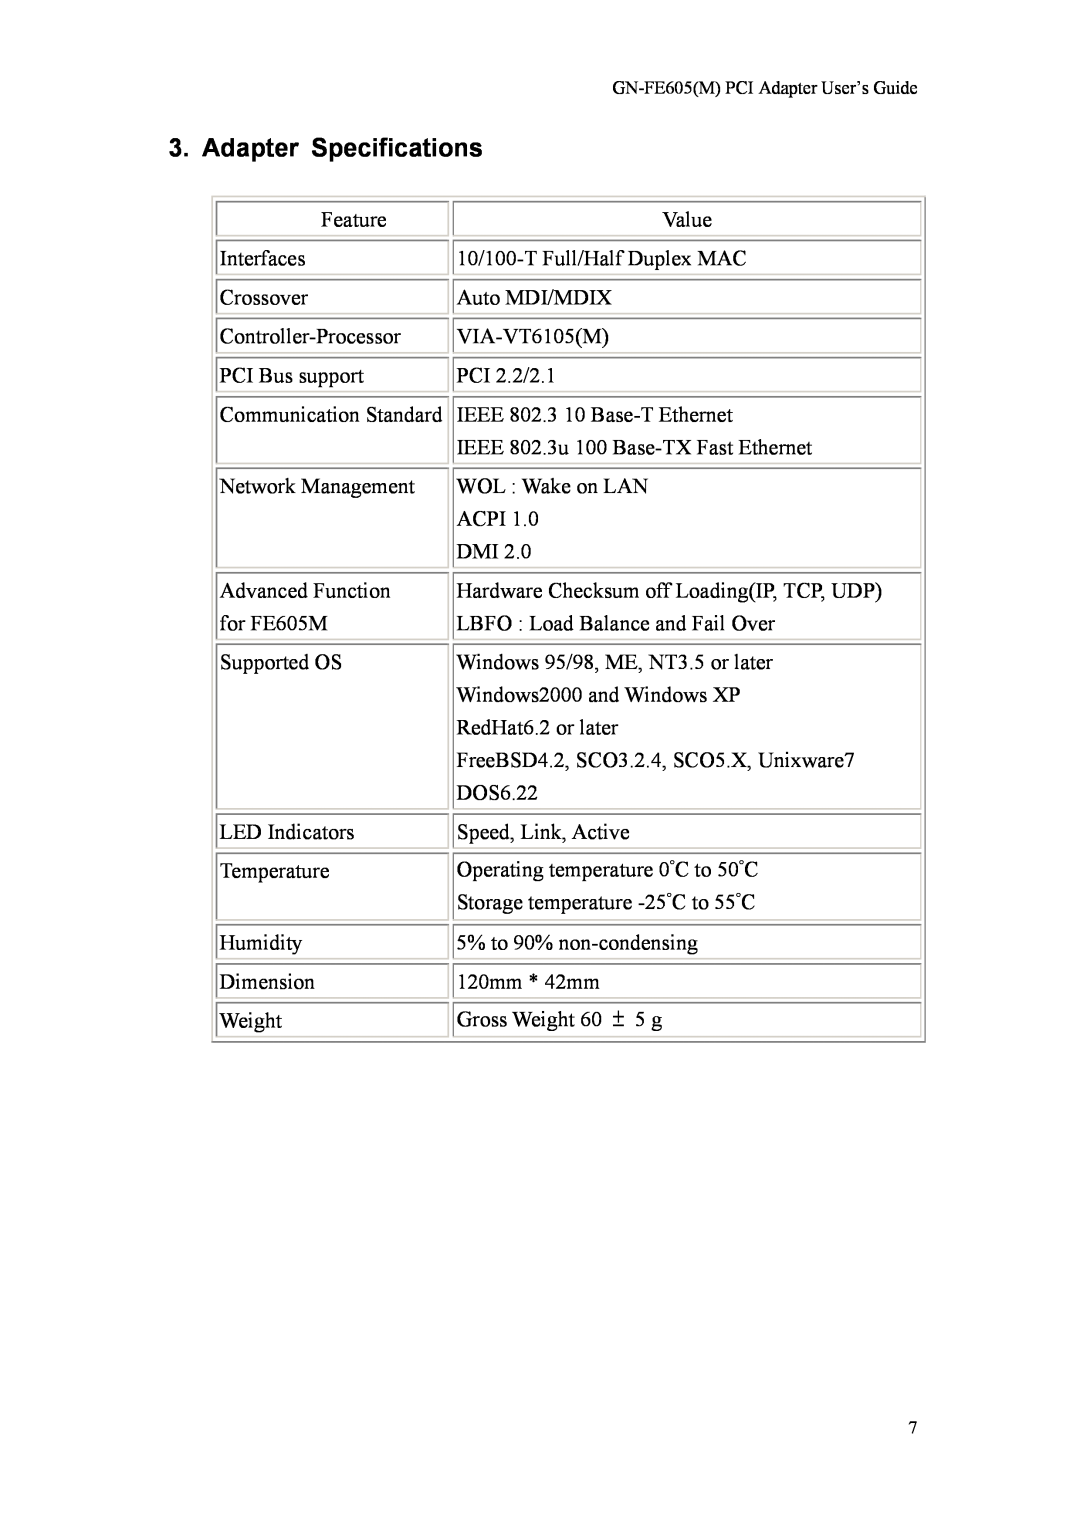 Gigabyte GN-FE605(M) manual Adapter Specifications 